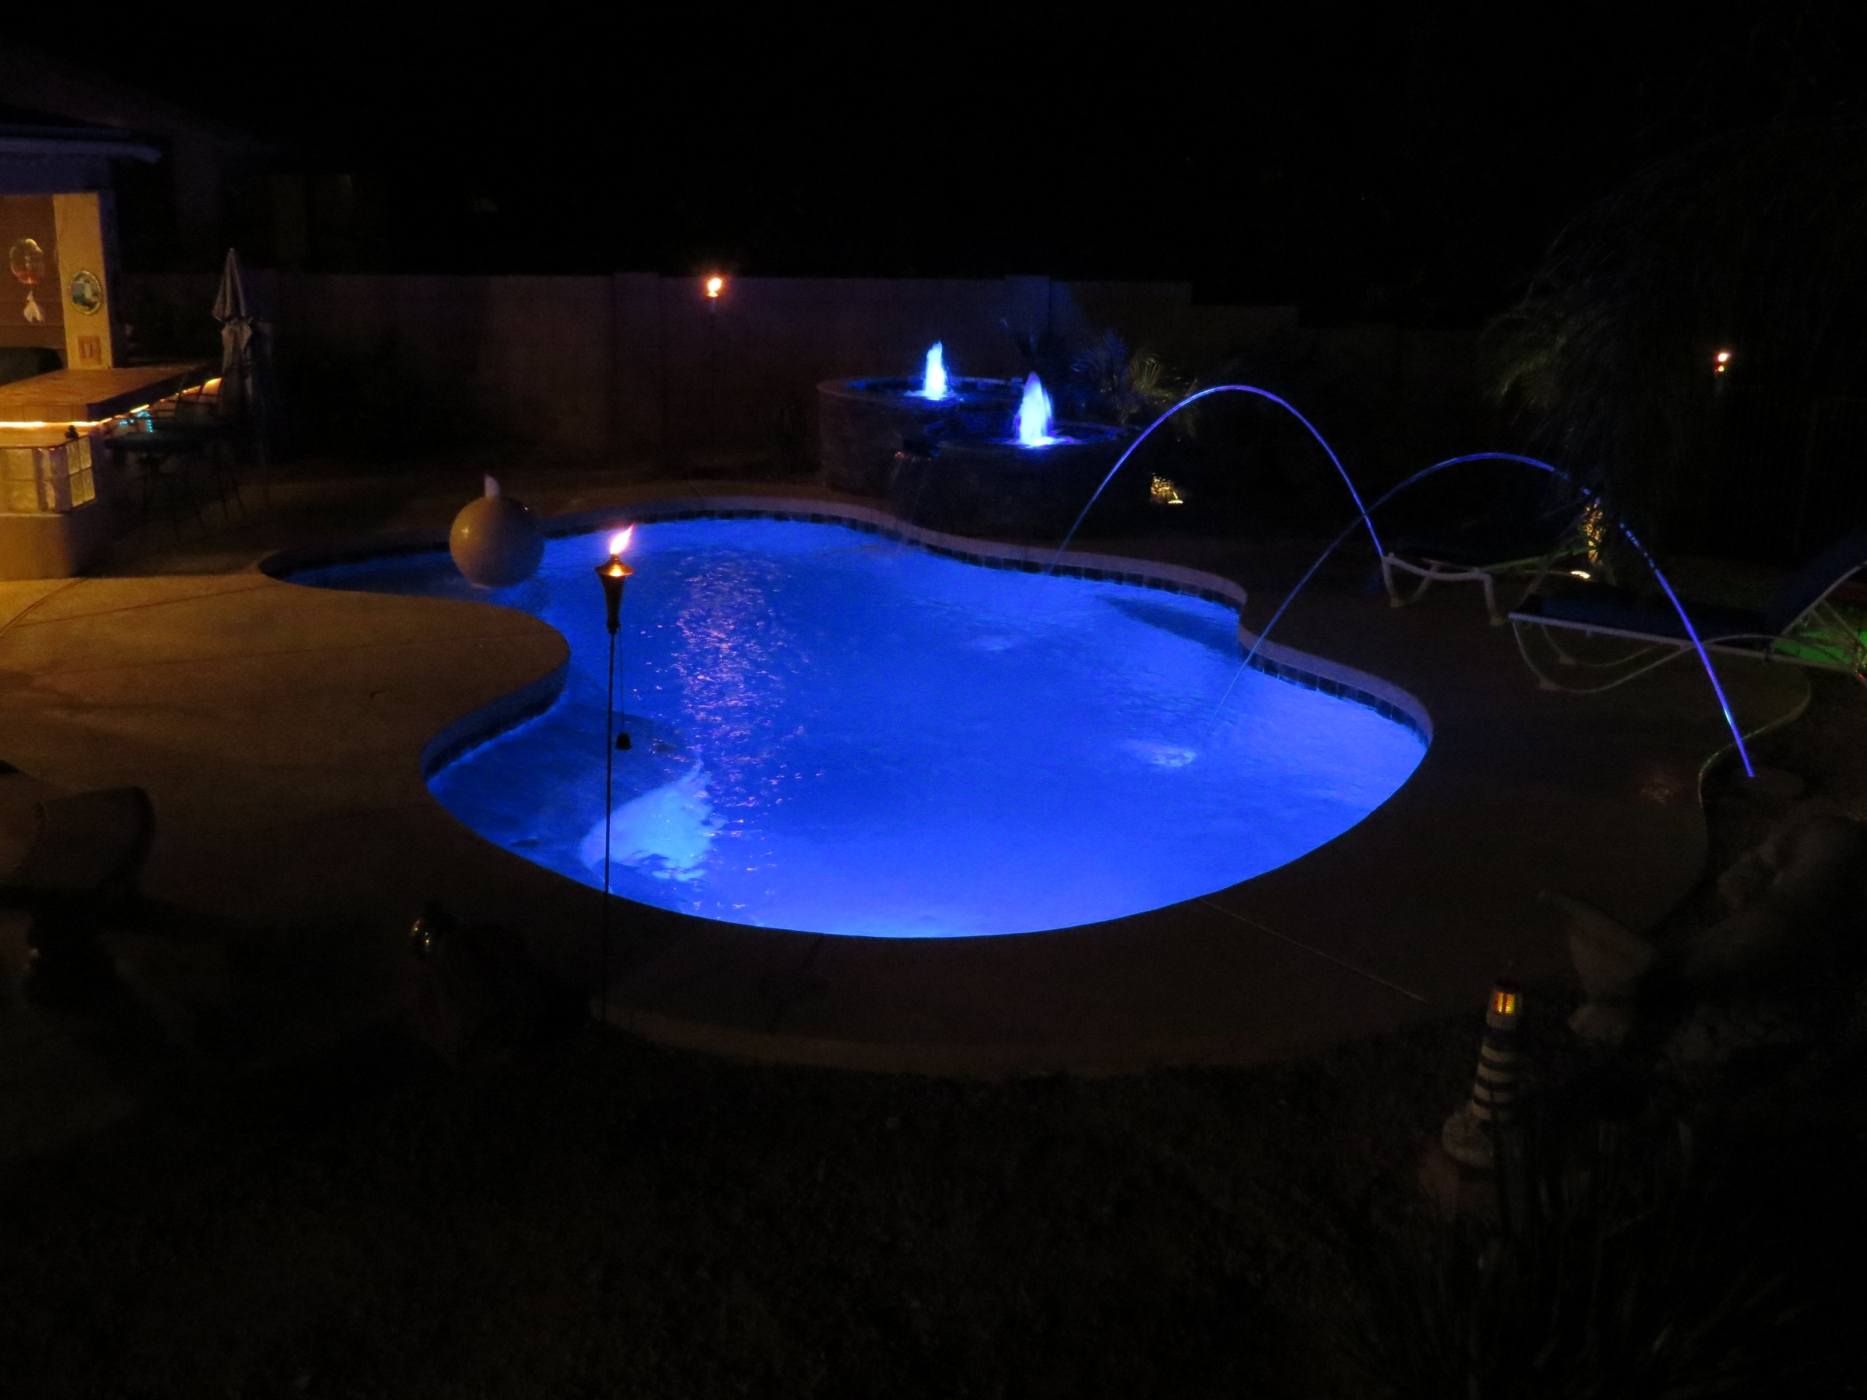 Does Your Scottsdale Pool Have a Focal Point for Winter Gatherings?